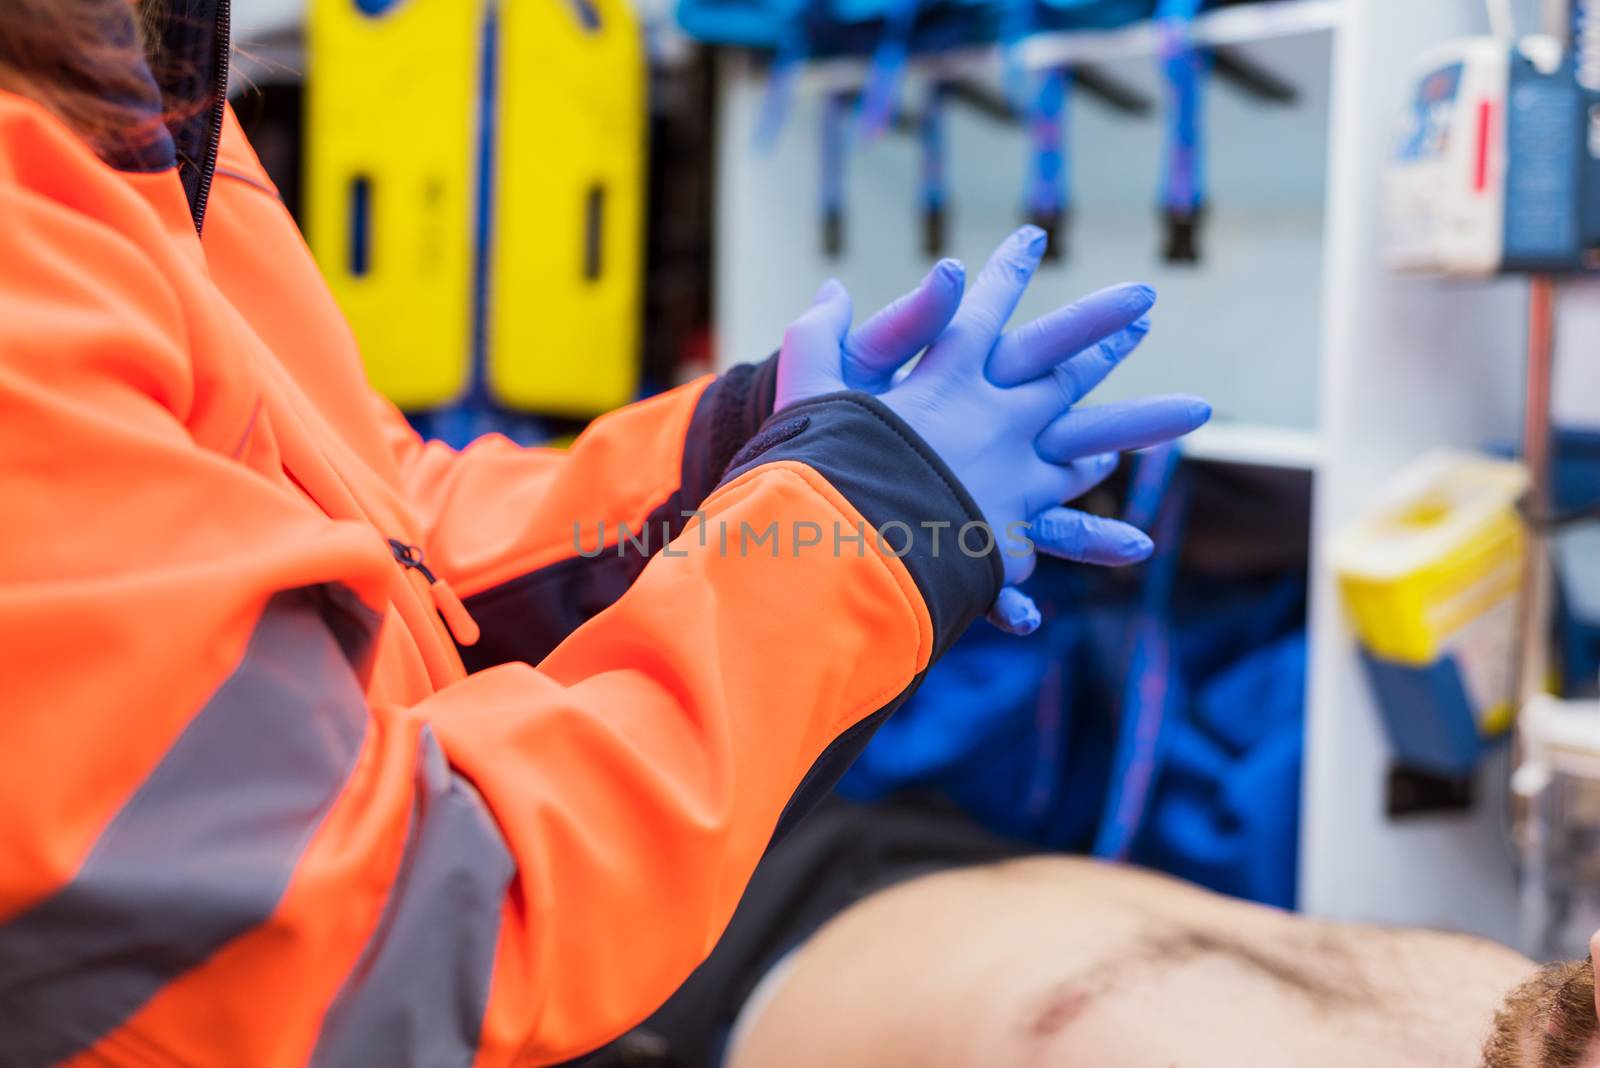 Emergency doctor putting on gloves in ambulance by HERRAEZ